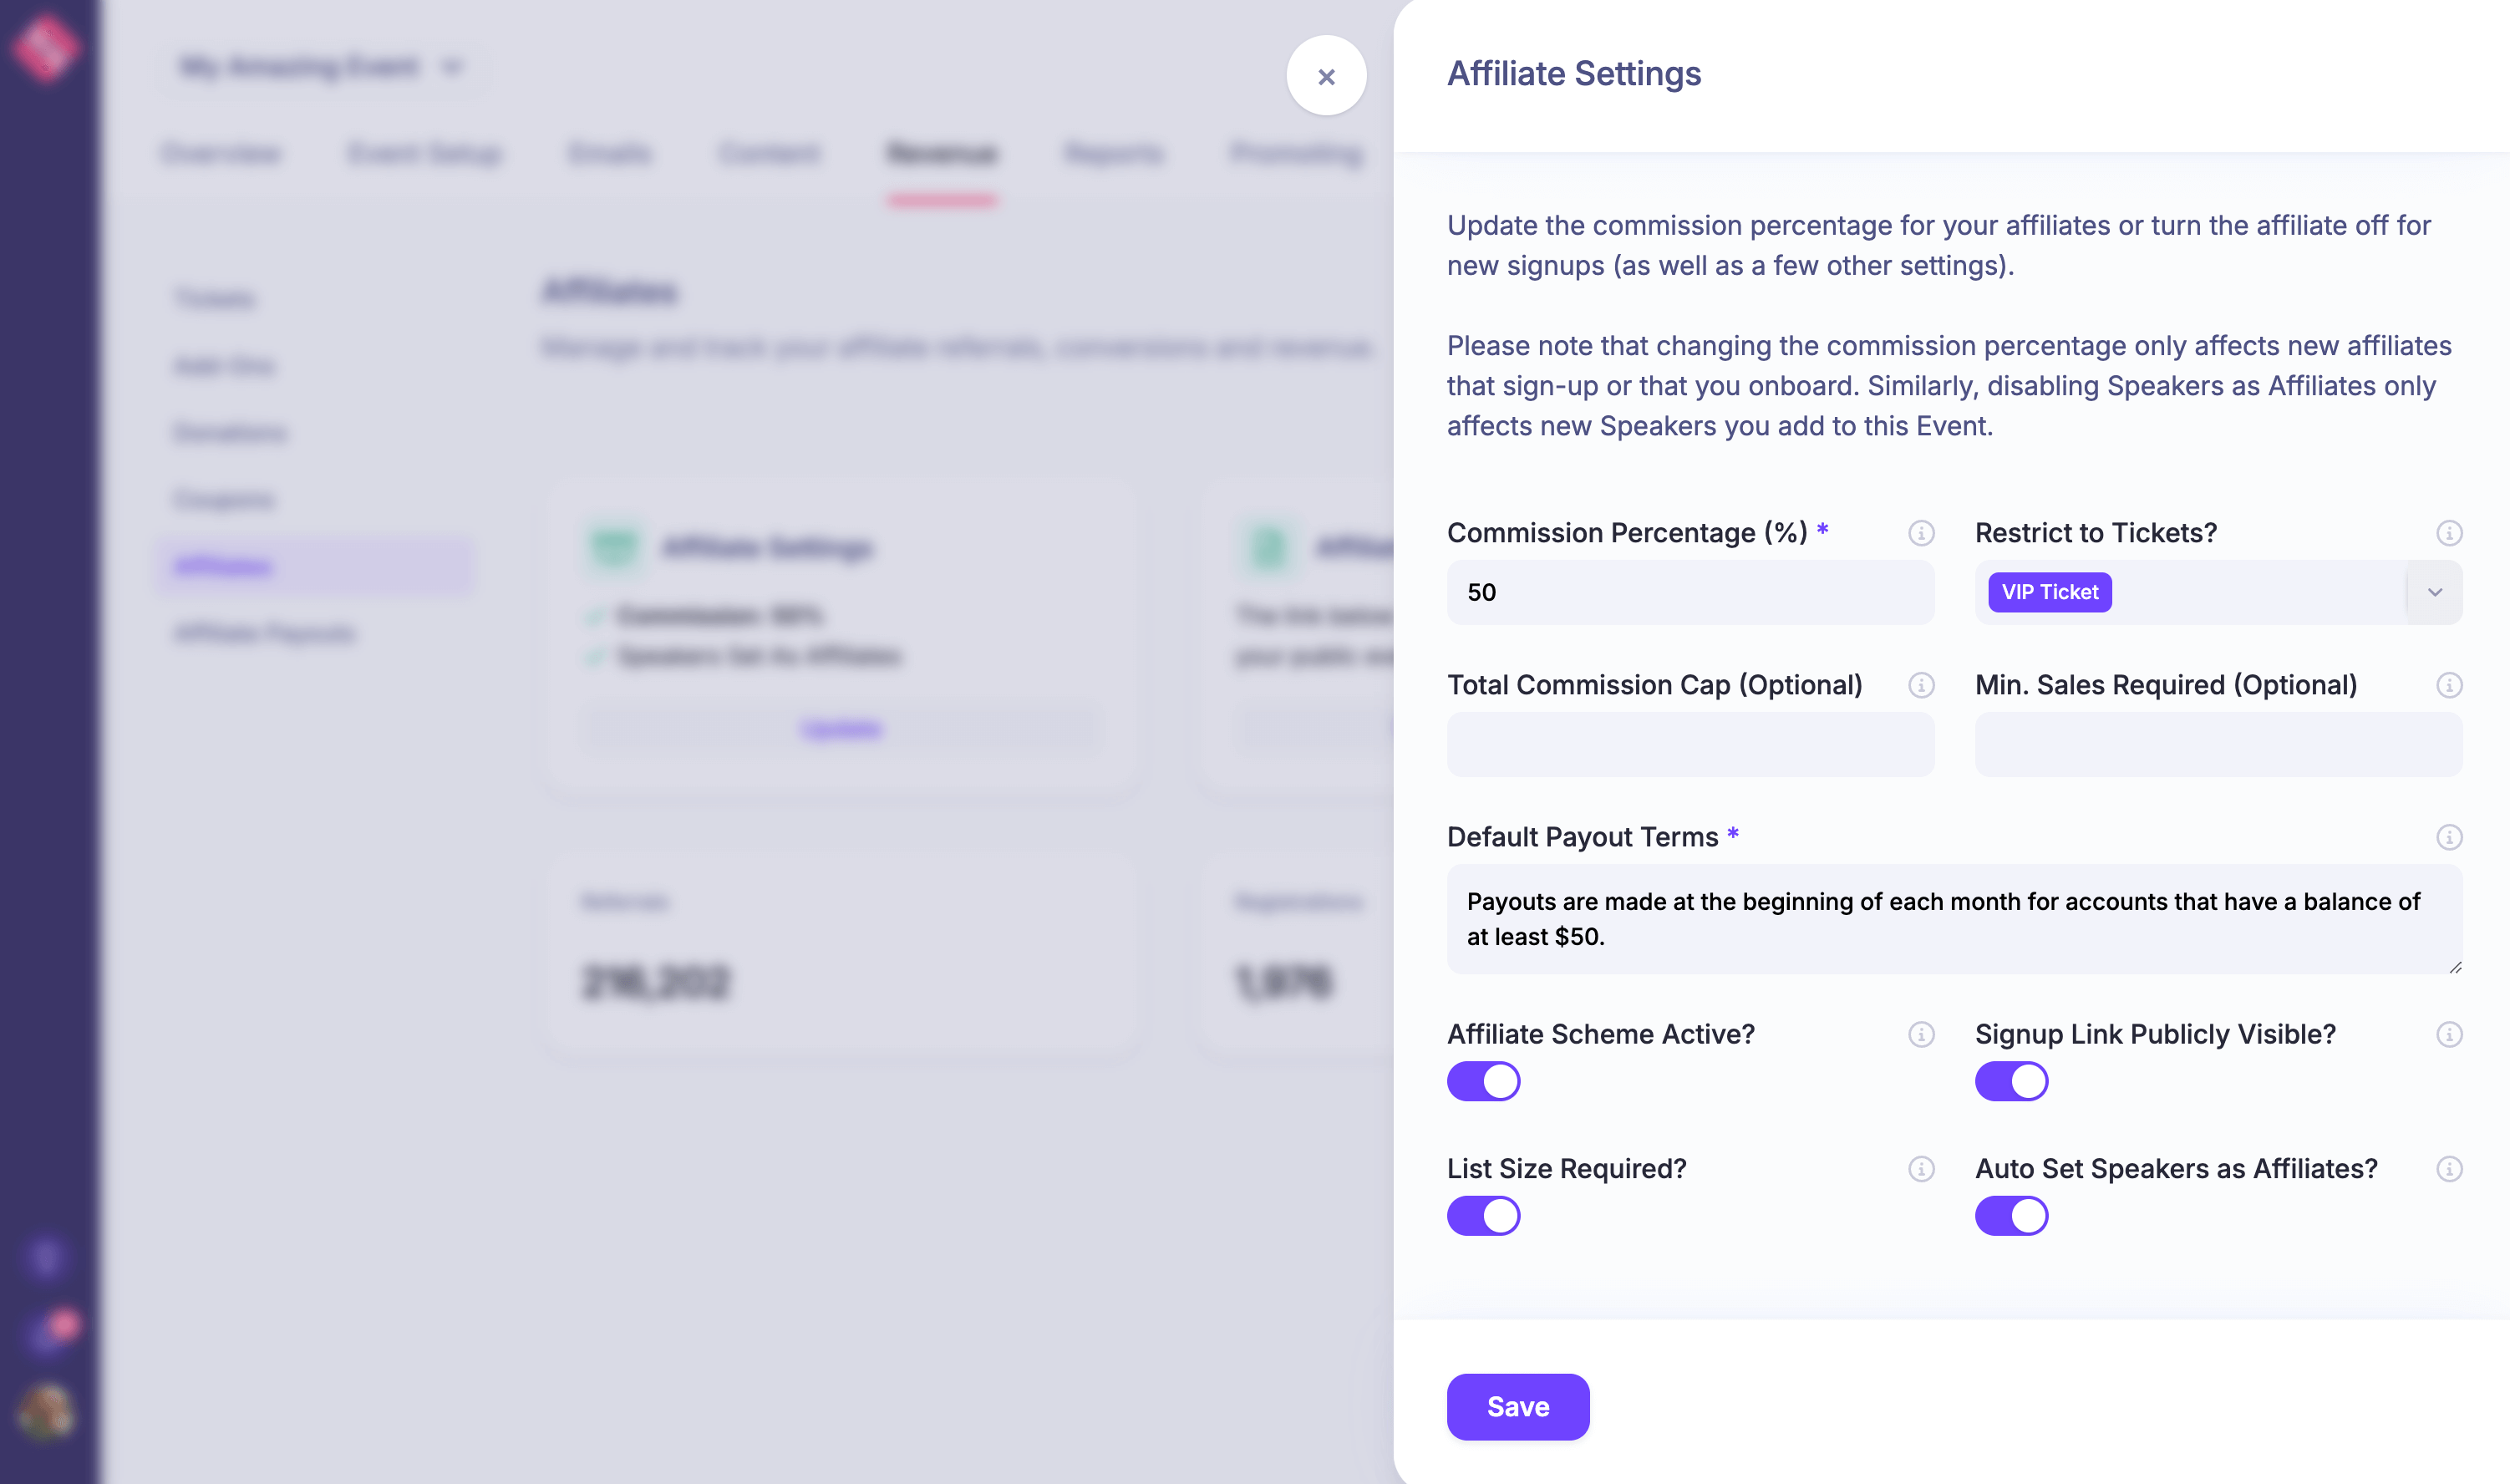 Configure exactly how you want your affiliate program to work. Set commission rates, caps and more.